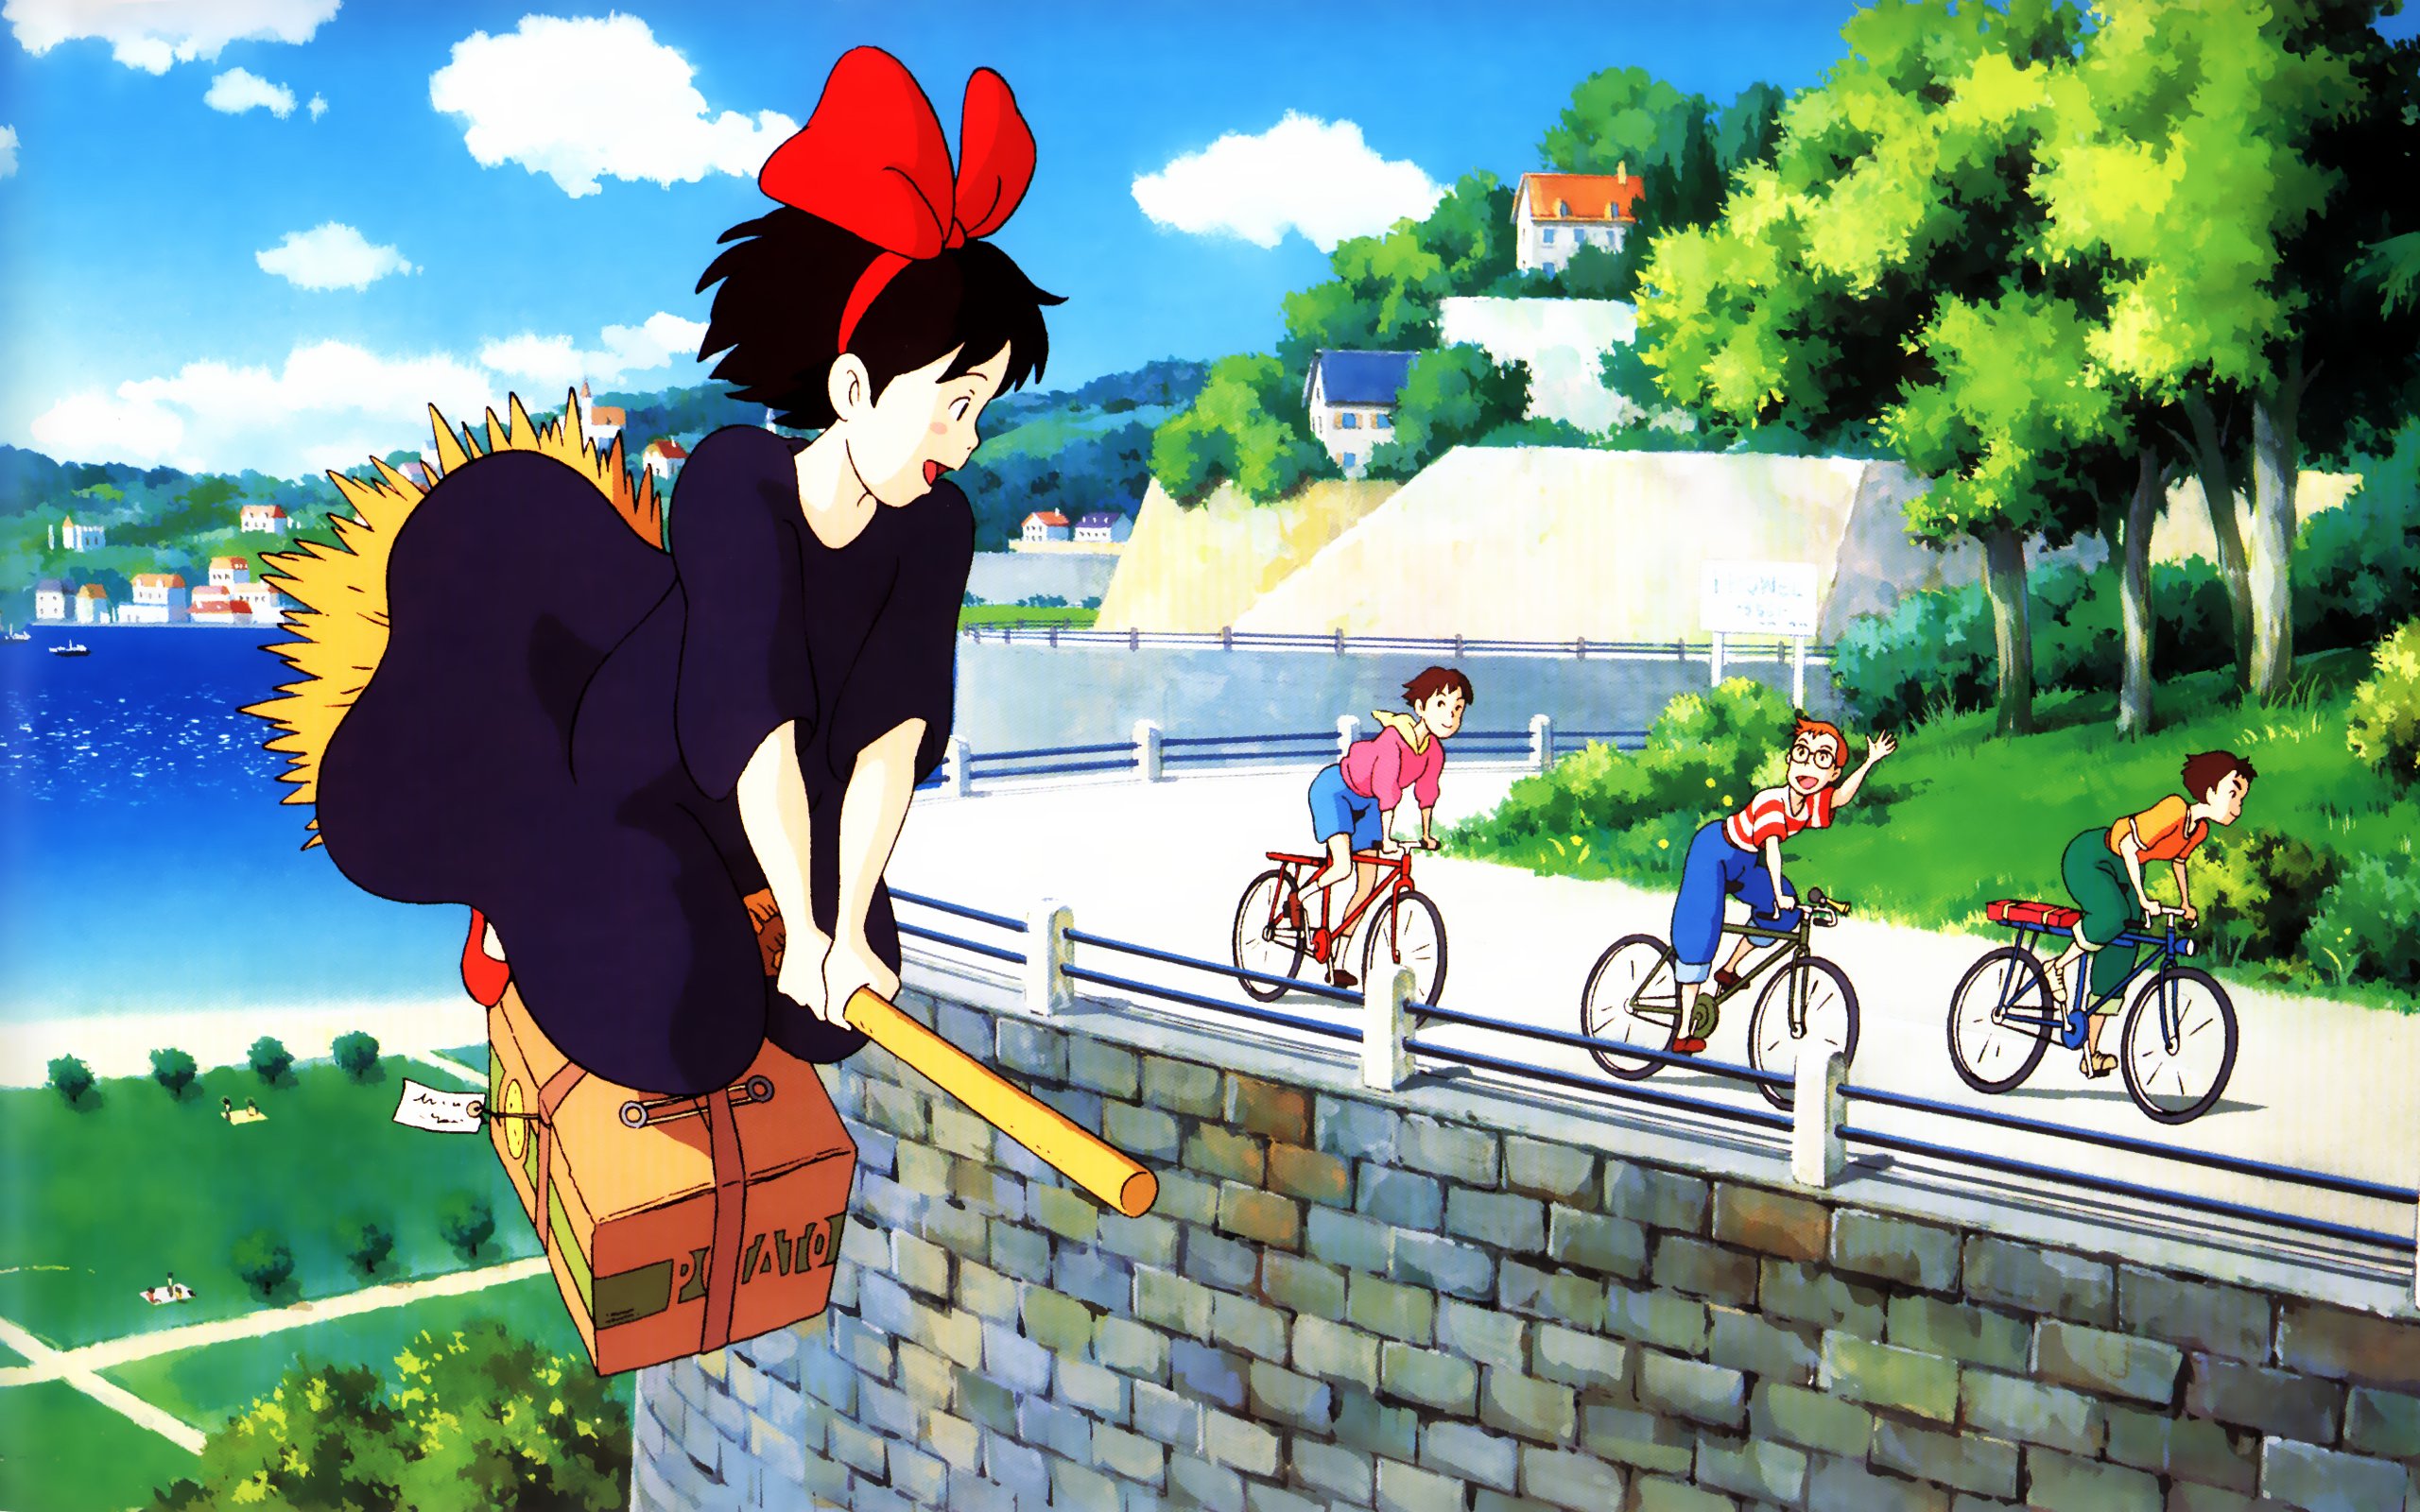 Kiki (Kiki's Delivery Service) HD Wallpapers and Backgrounds. 